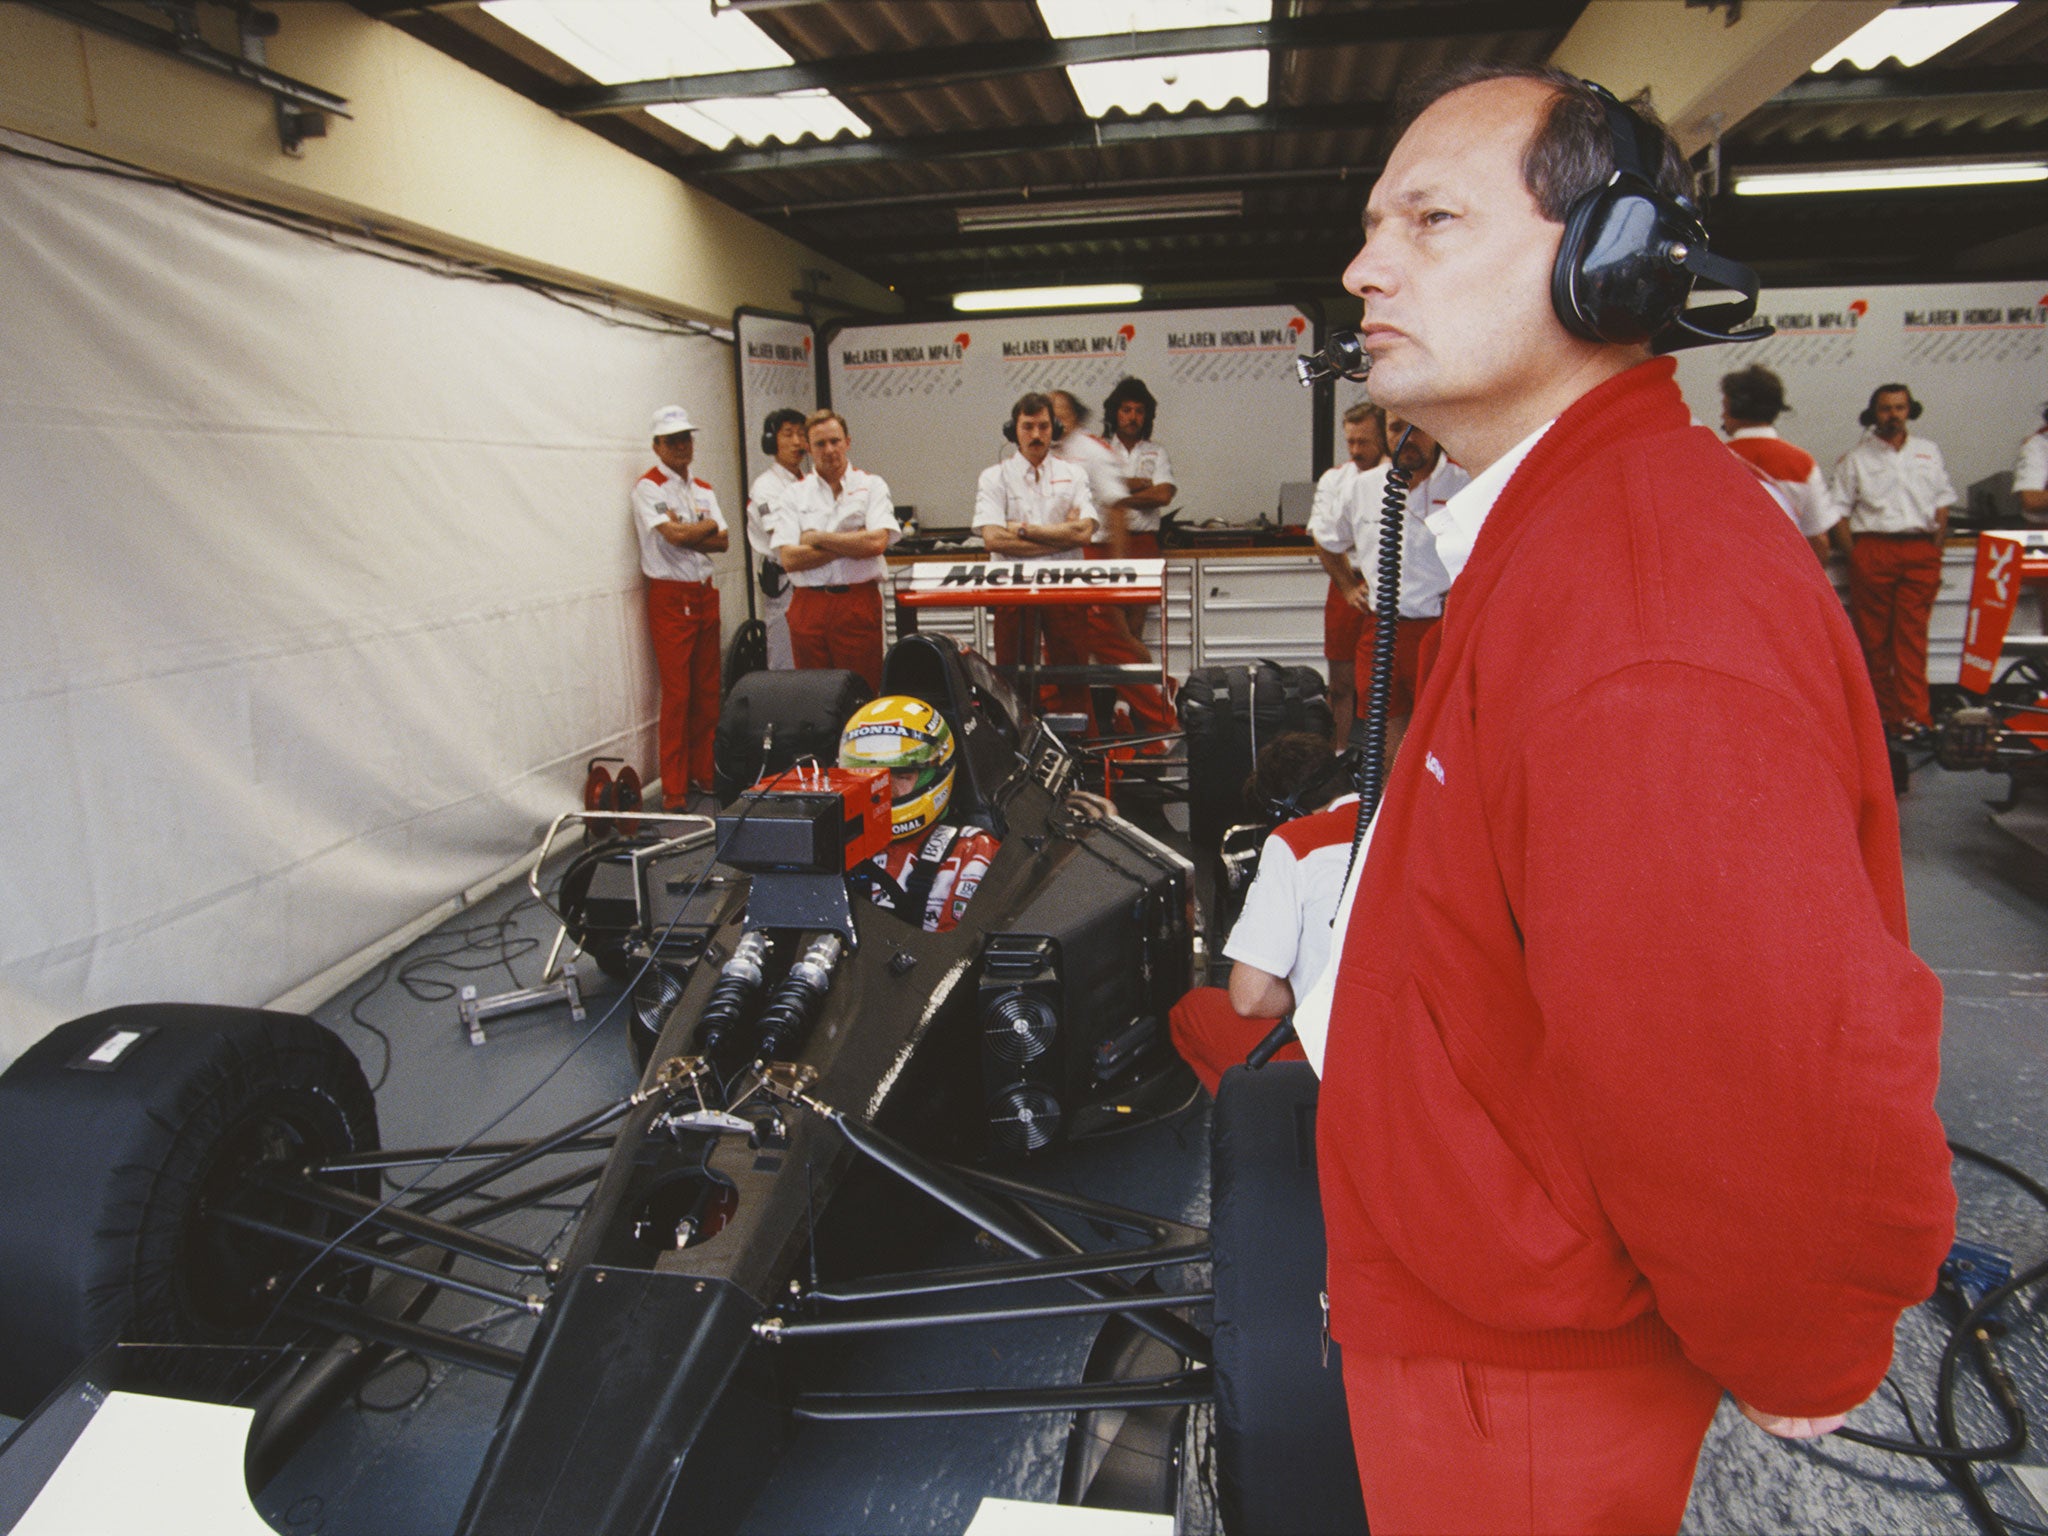 Ron Dennis watches on as Ayrton Senna sits in the cockpit of the McLaren-Honda